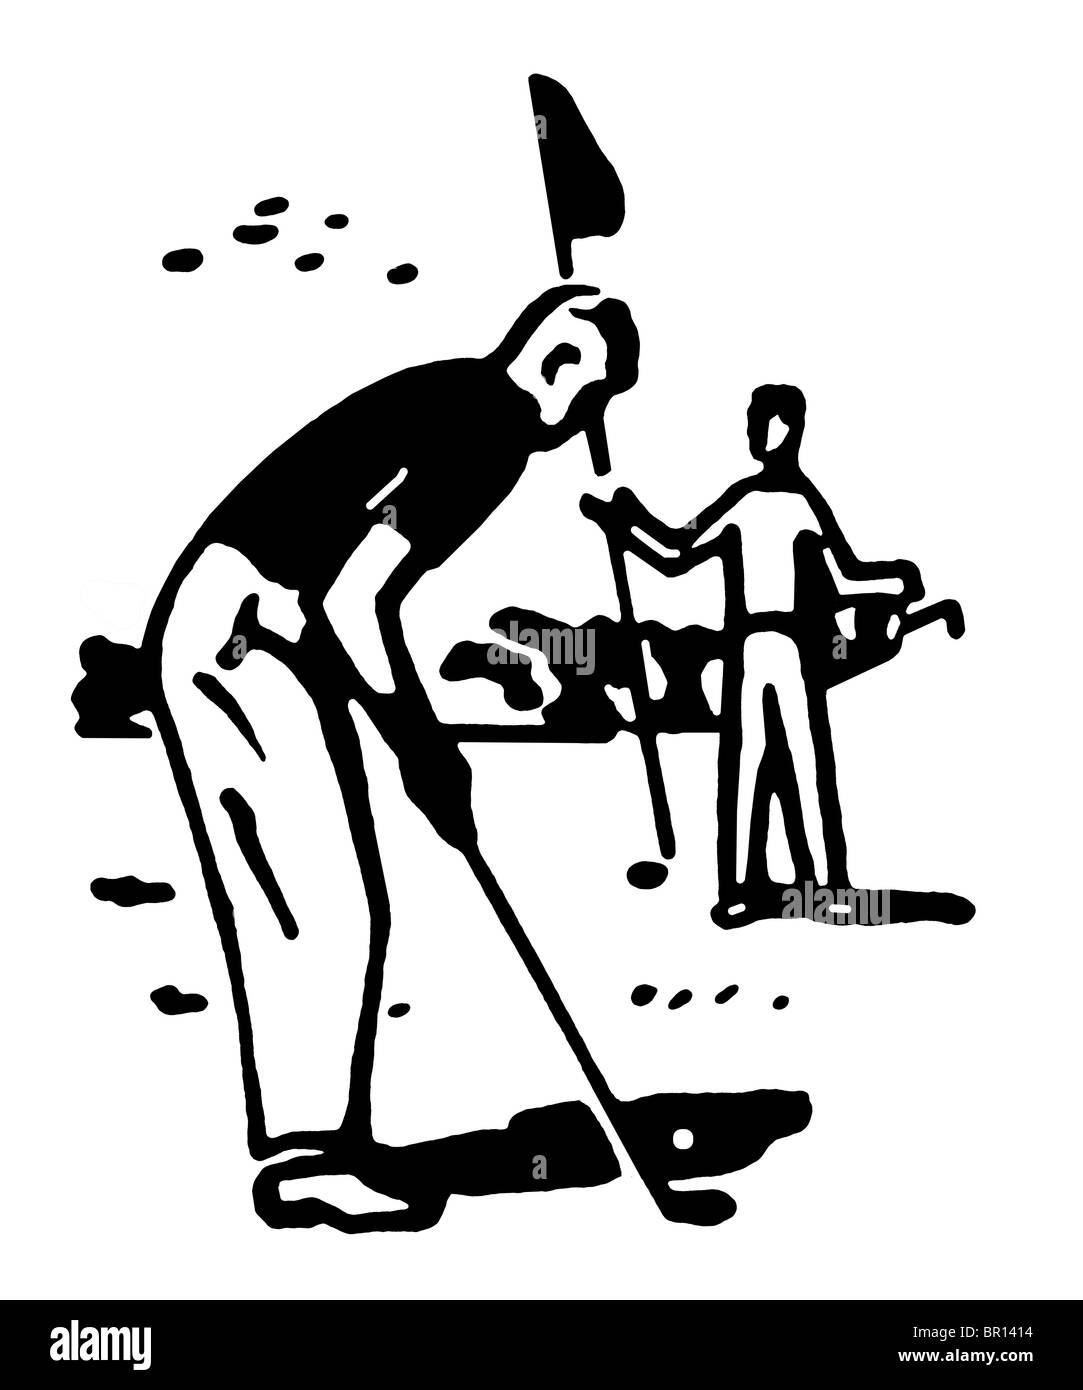 A black and white version of an illustration of a man playing golf Stock Photo